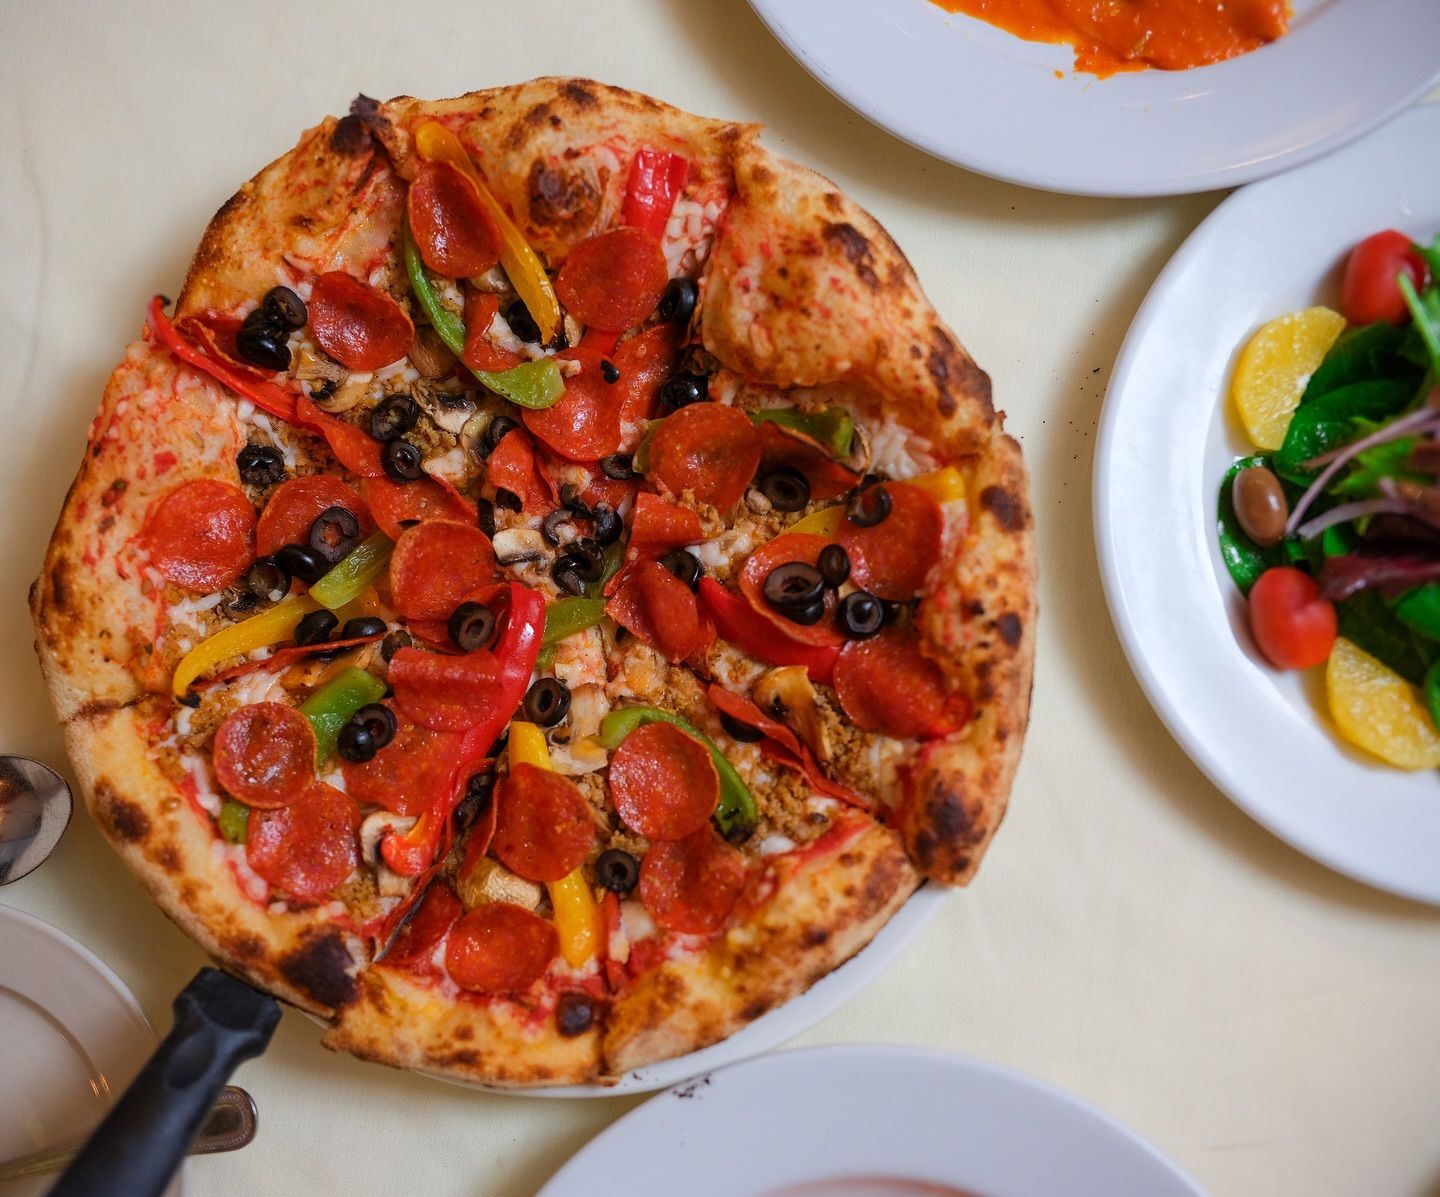 A pizza with pepperoni , olives , peppers and other vegetables is on a table with other plates of food.